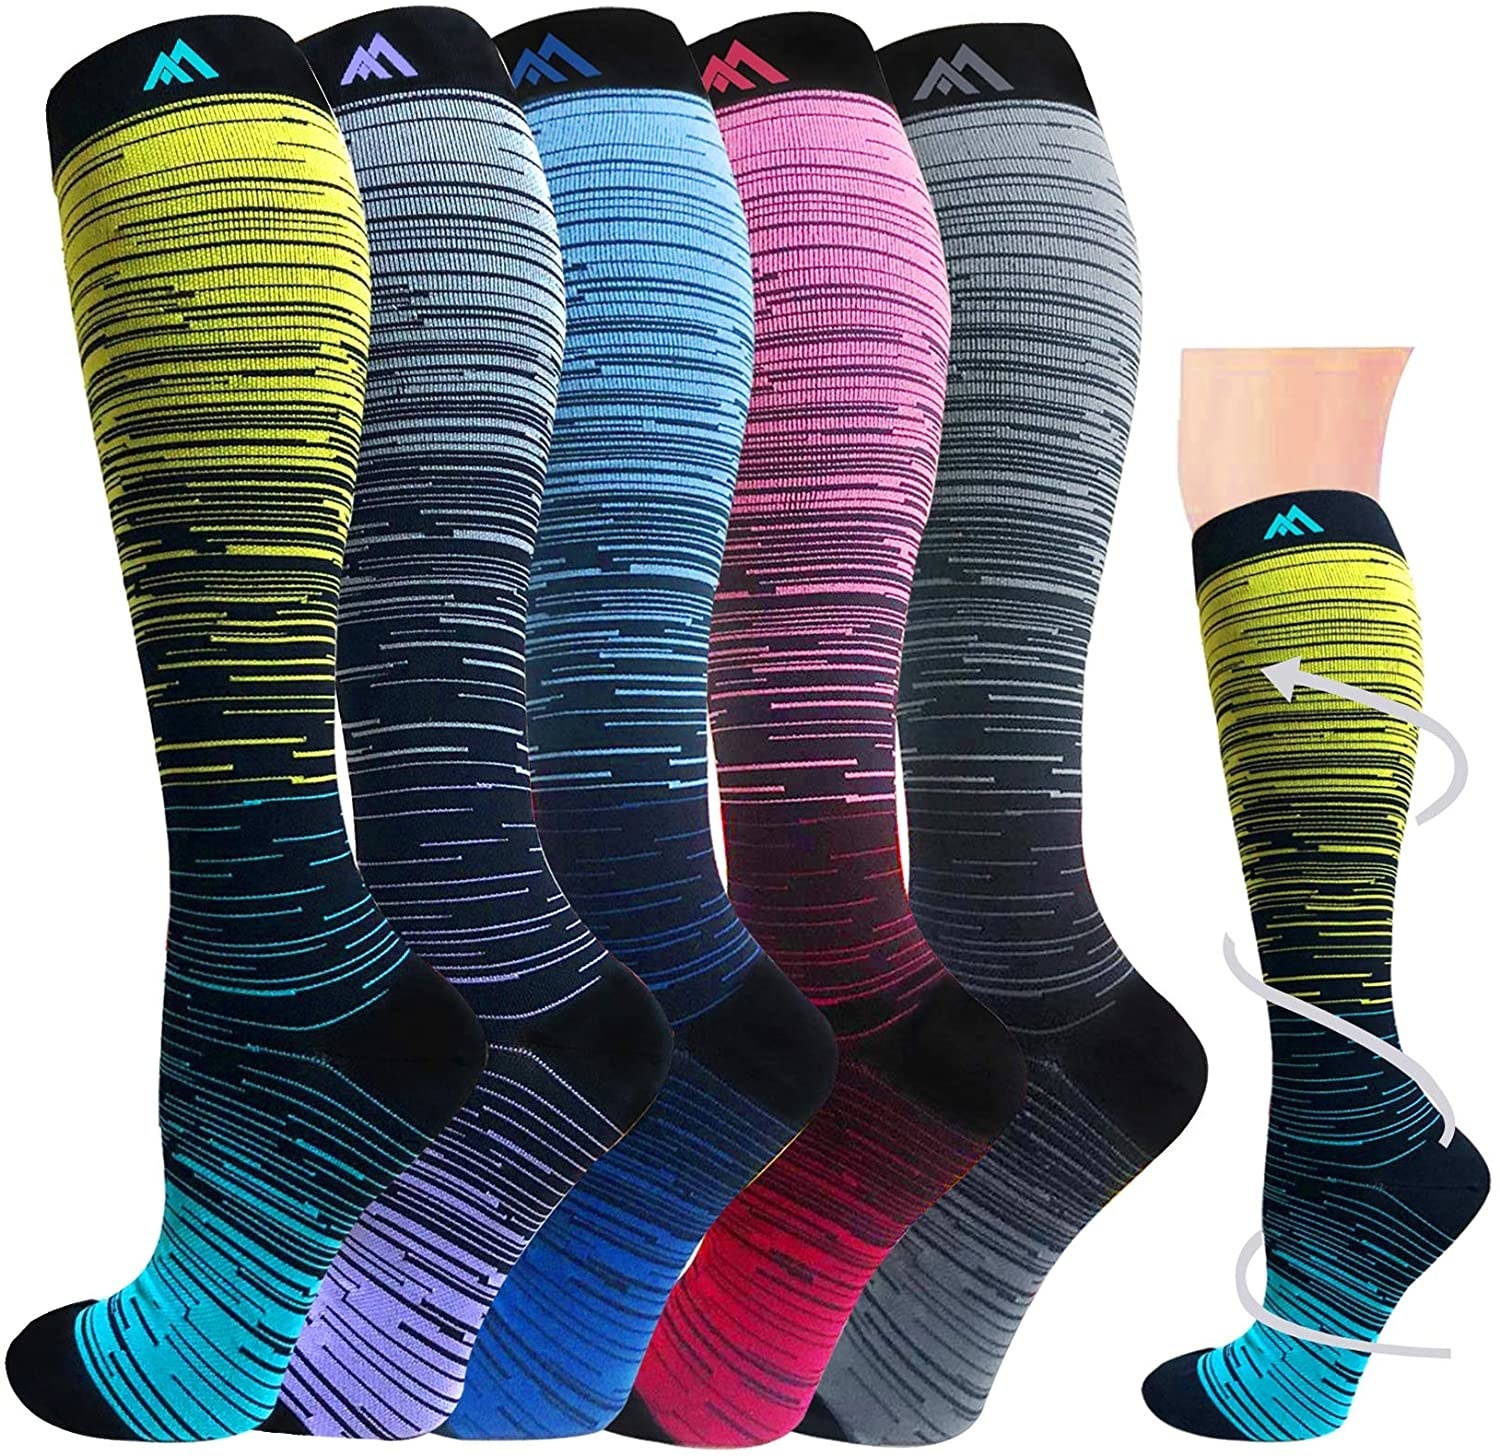 five knee-high compression socks, each a different color